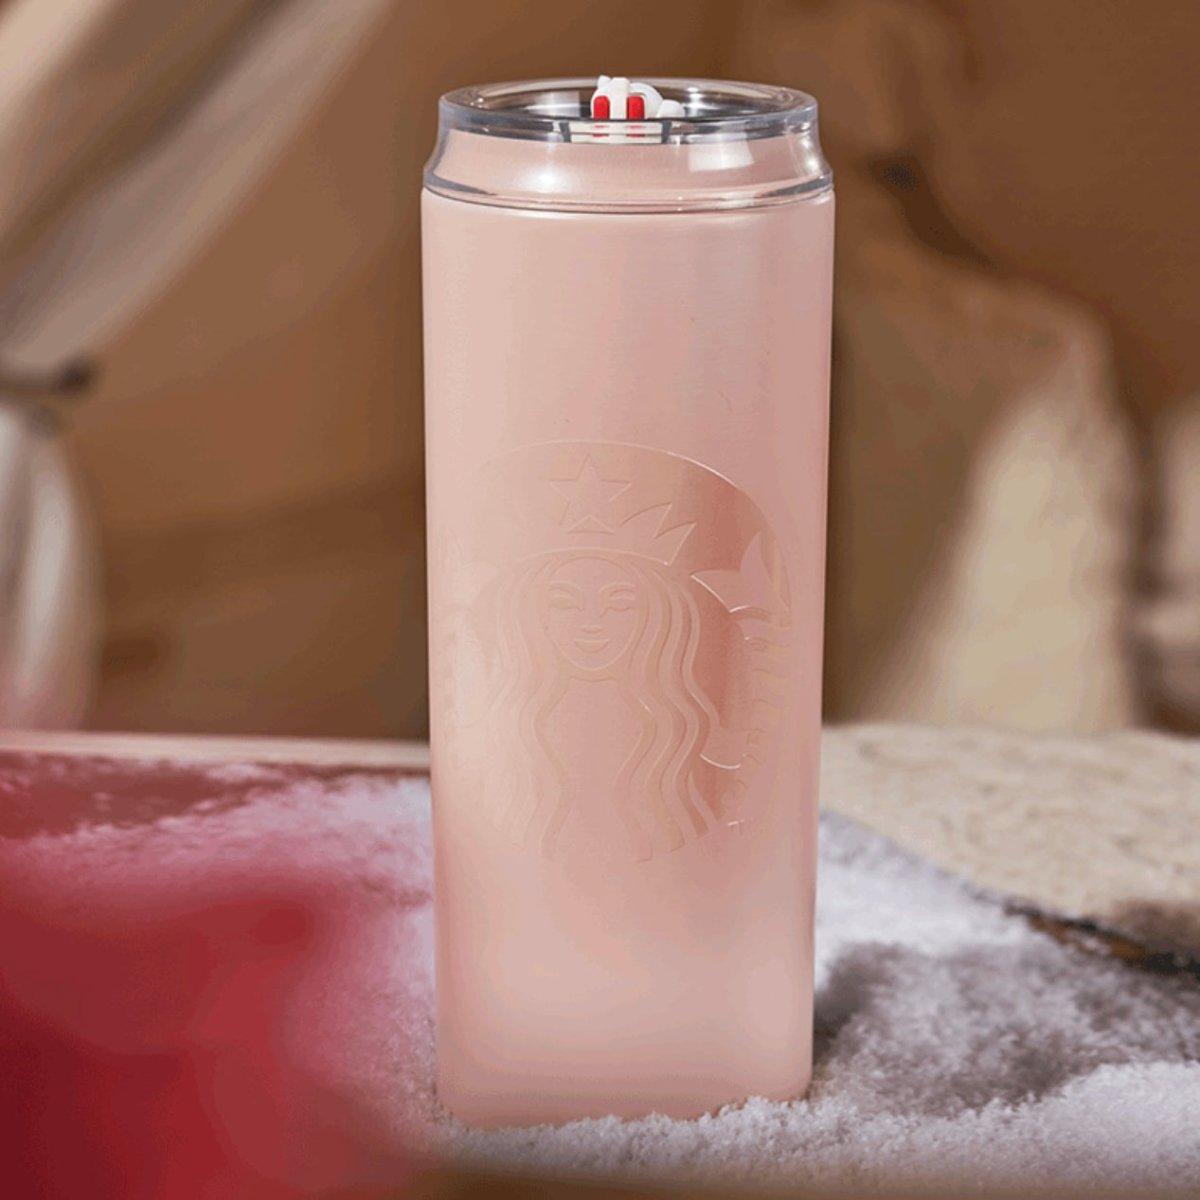 Starbucks China Magic Bear Stainless Steel Travel Cup